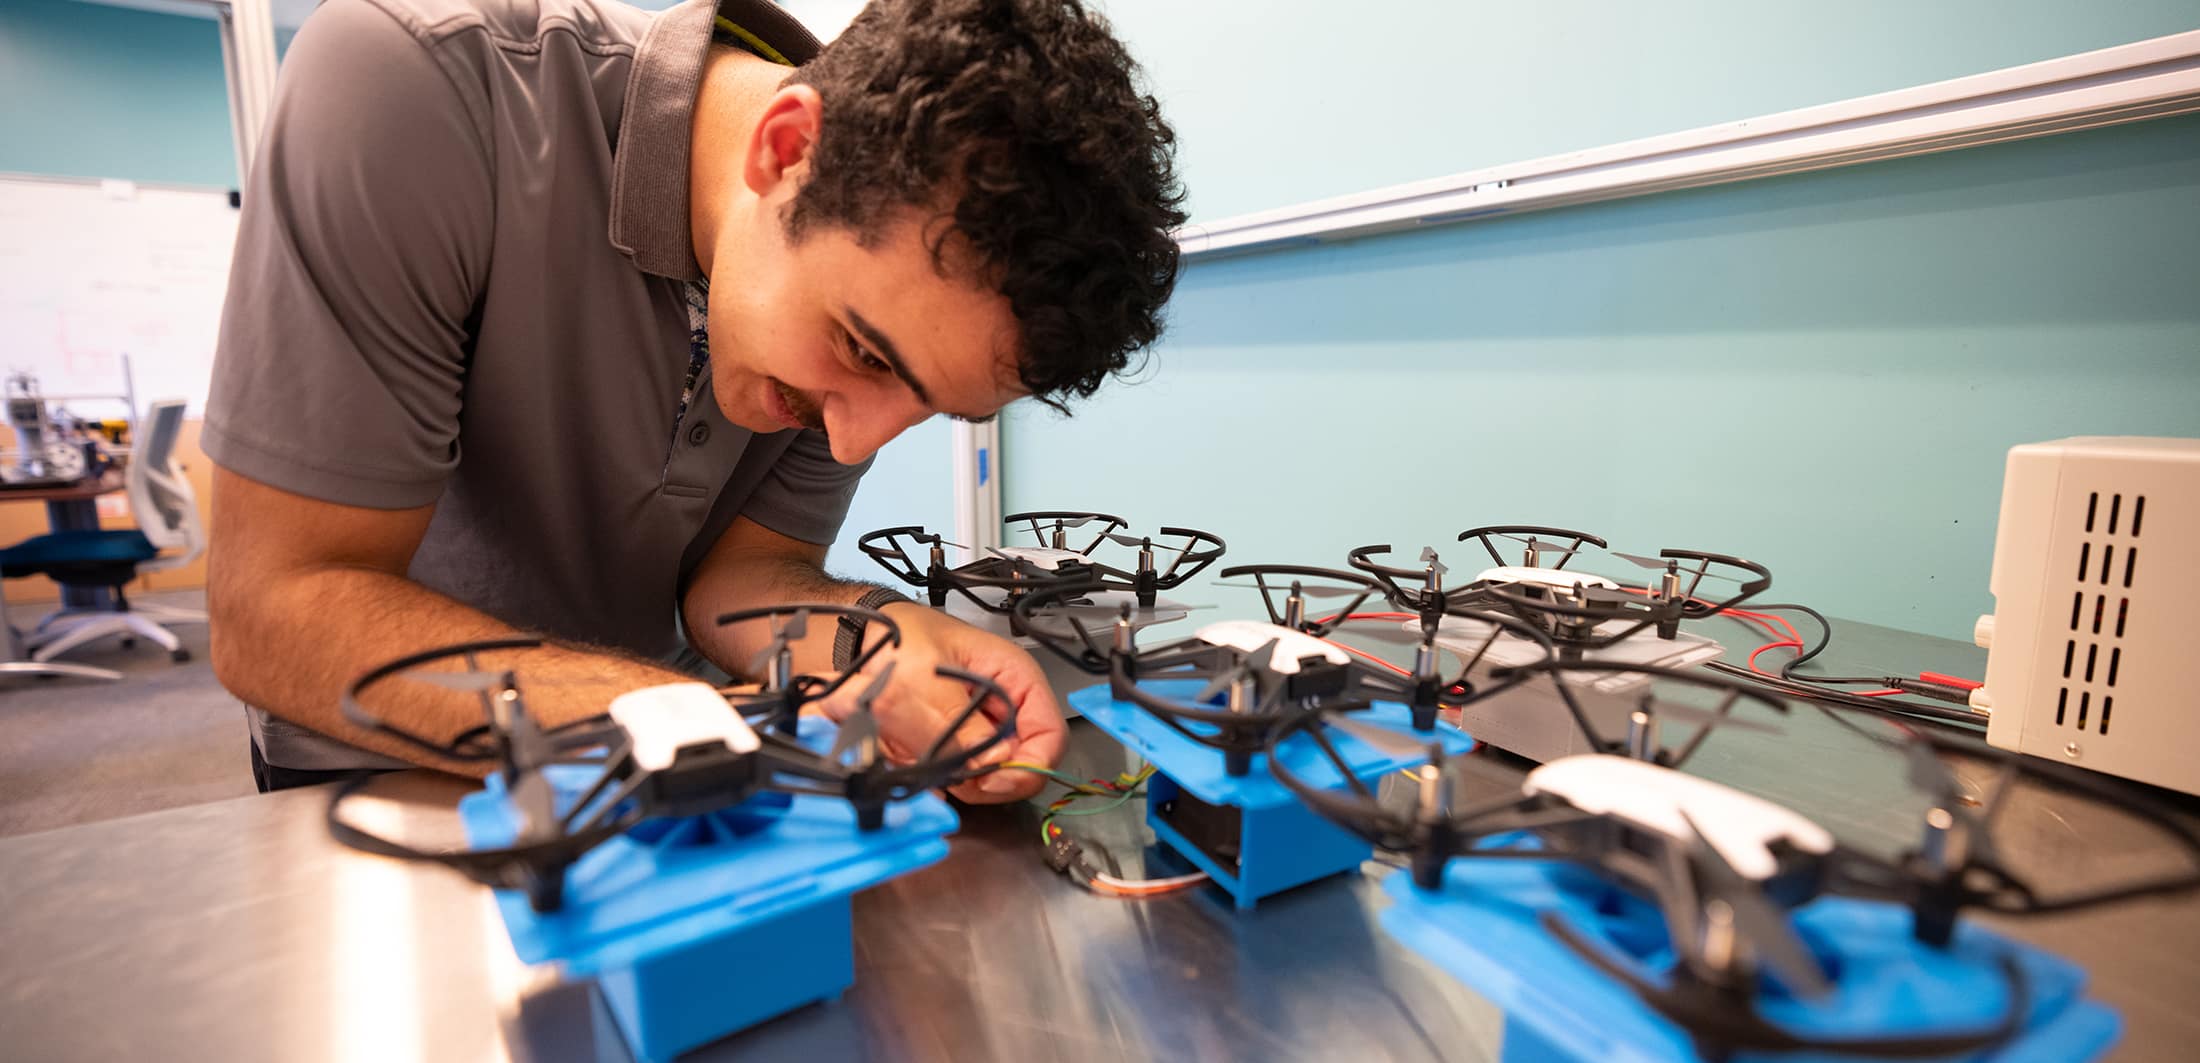 A student works on small drones at a table.